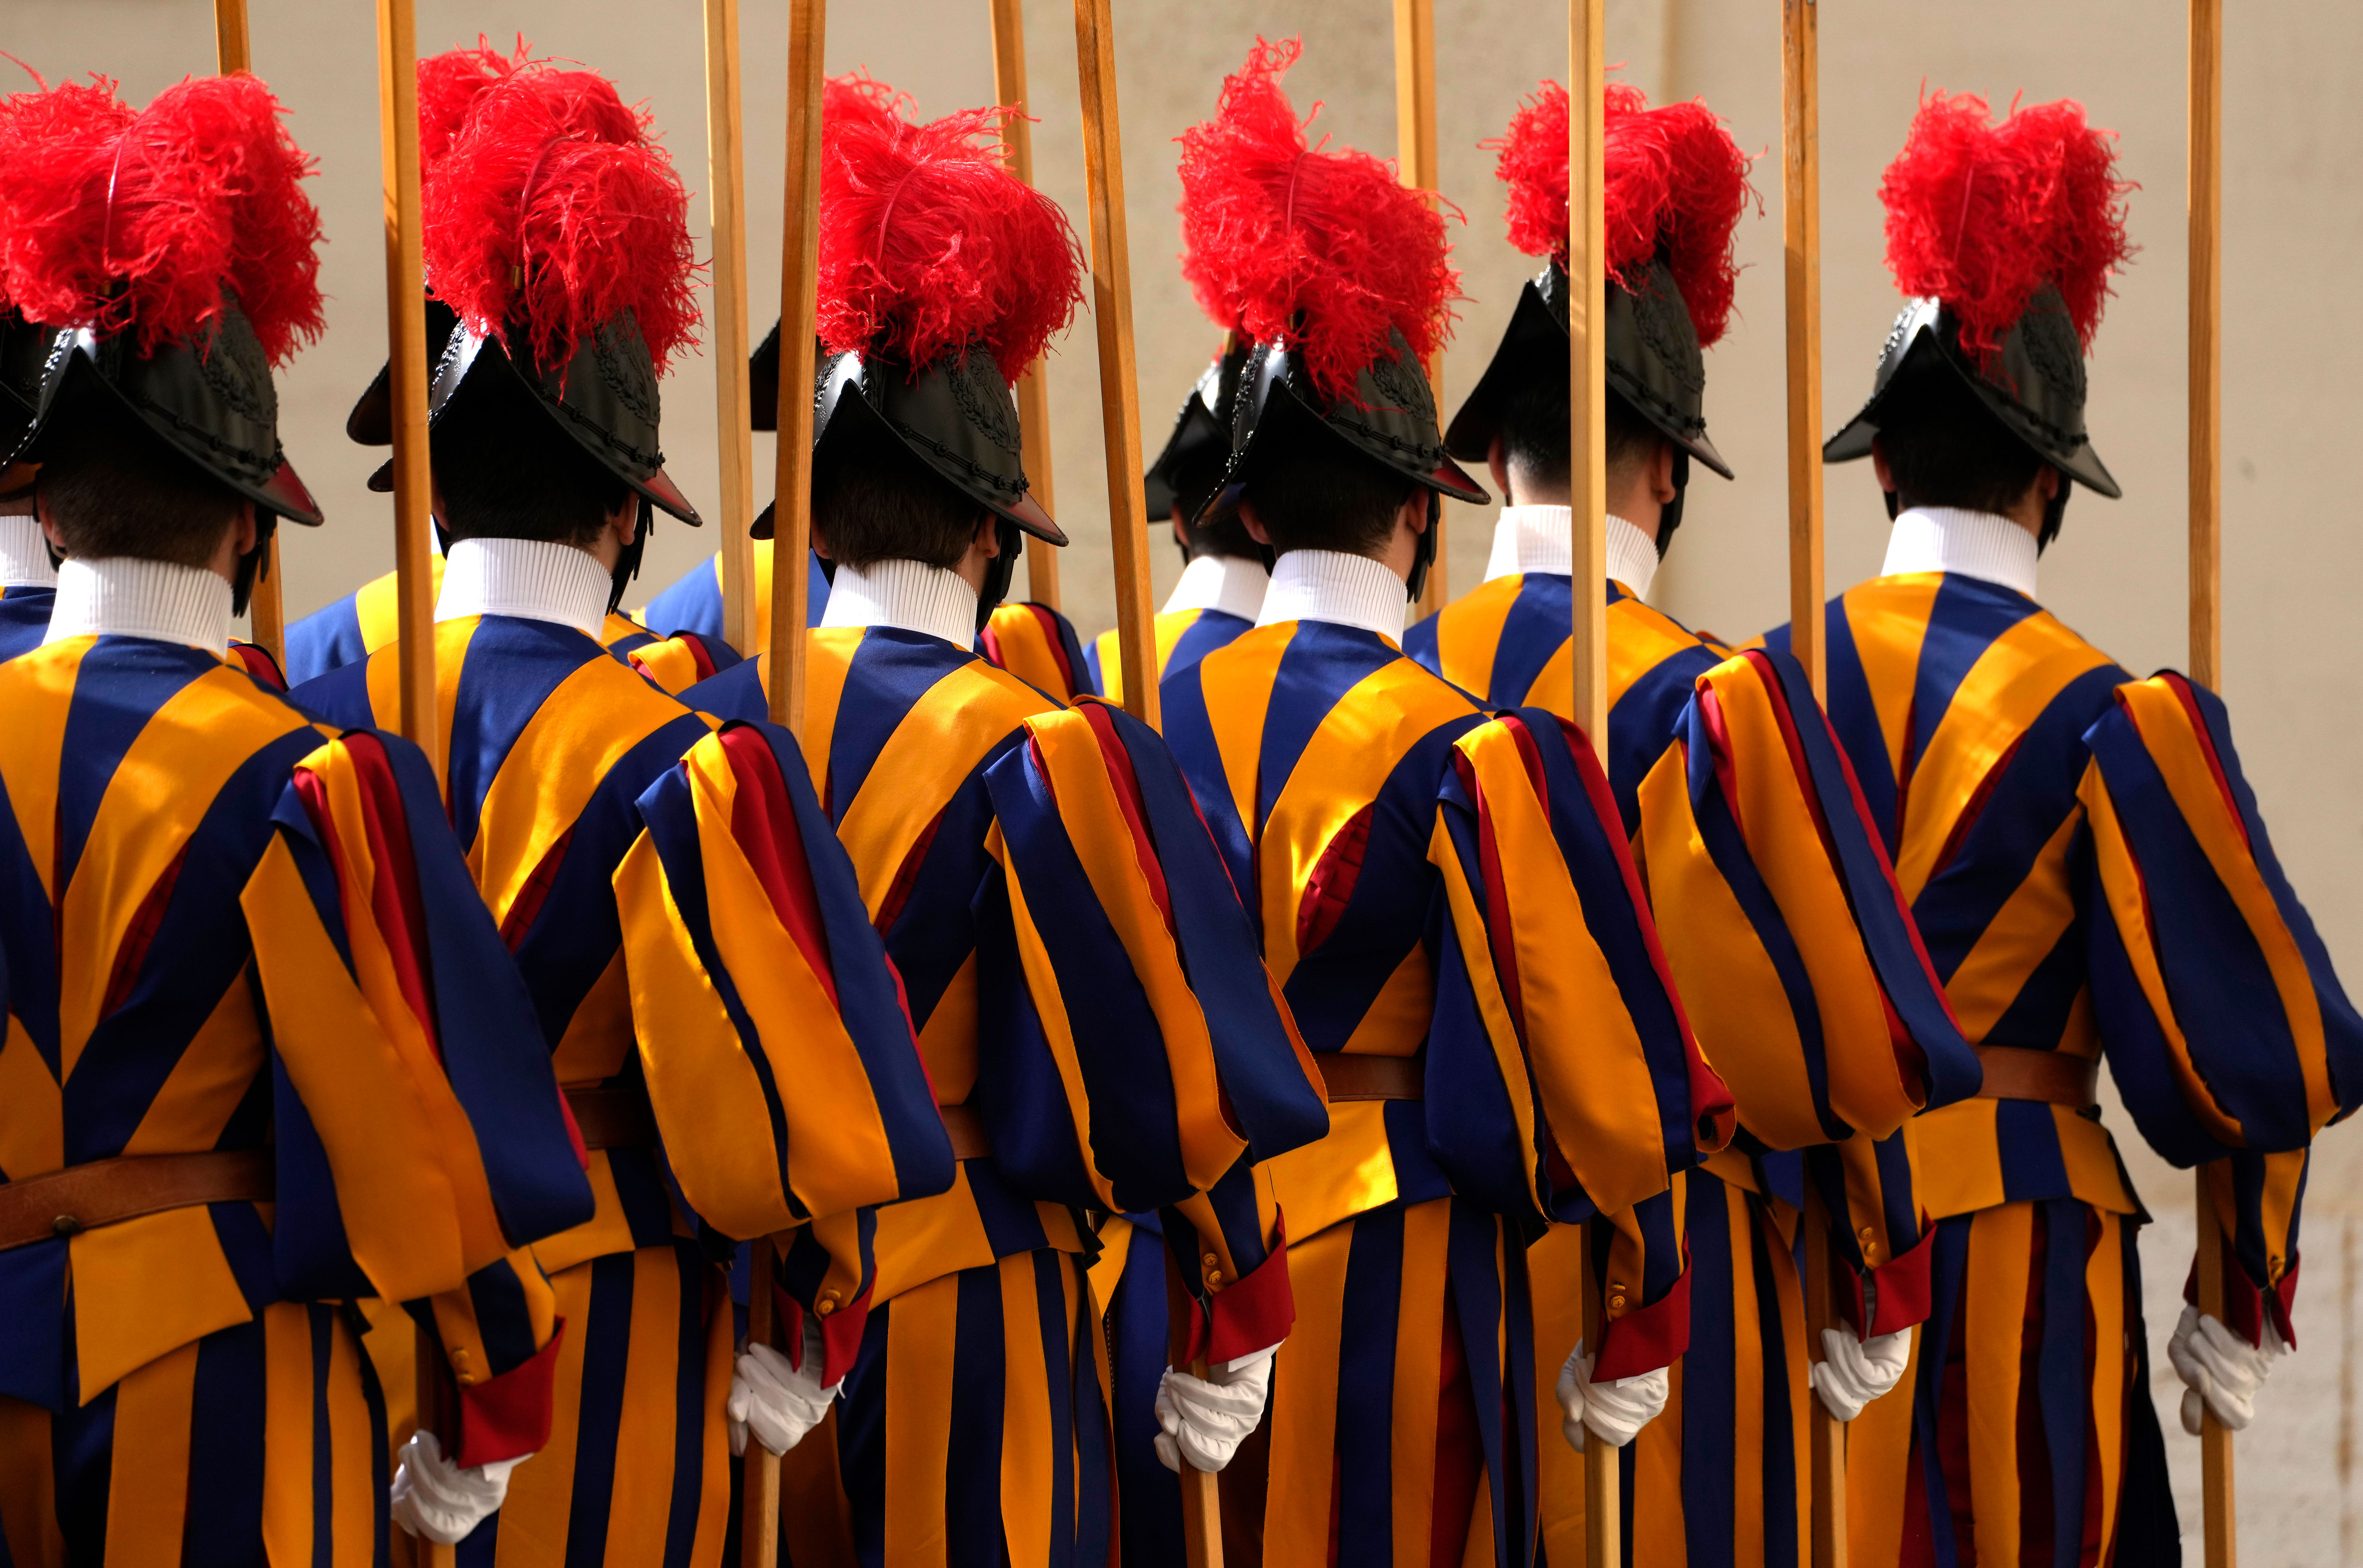 The Swiss Guards prepare for the arrival of President Joe Biden for a meeting with Pope Francis at the Vatican on October 29.